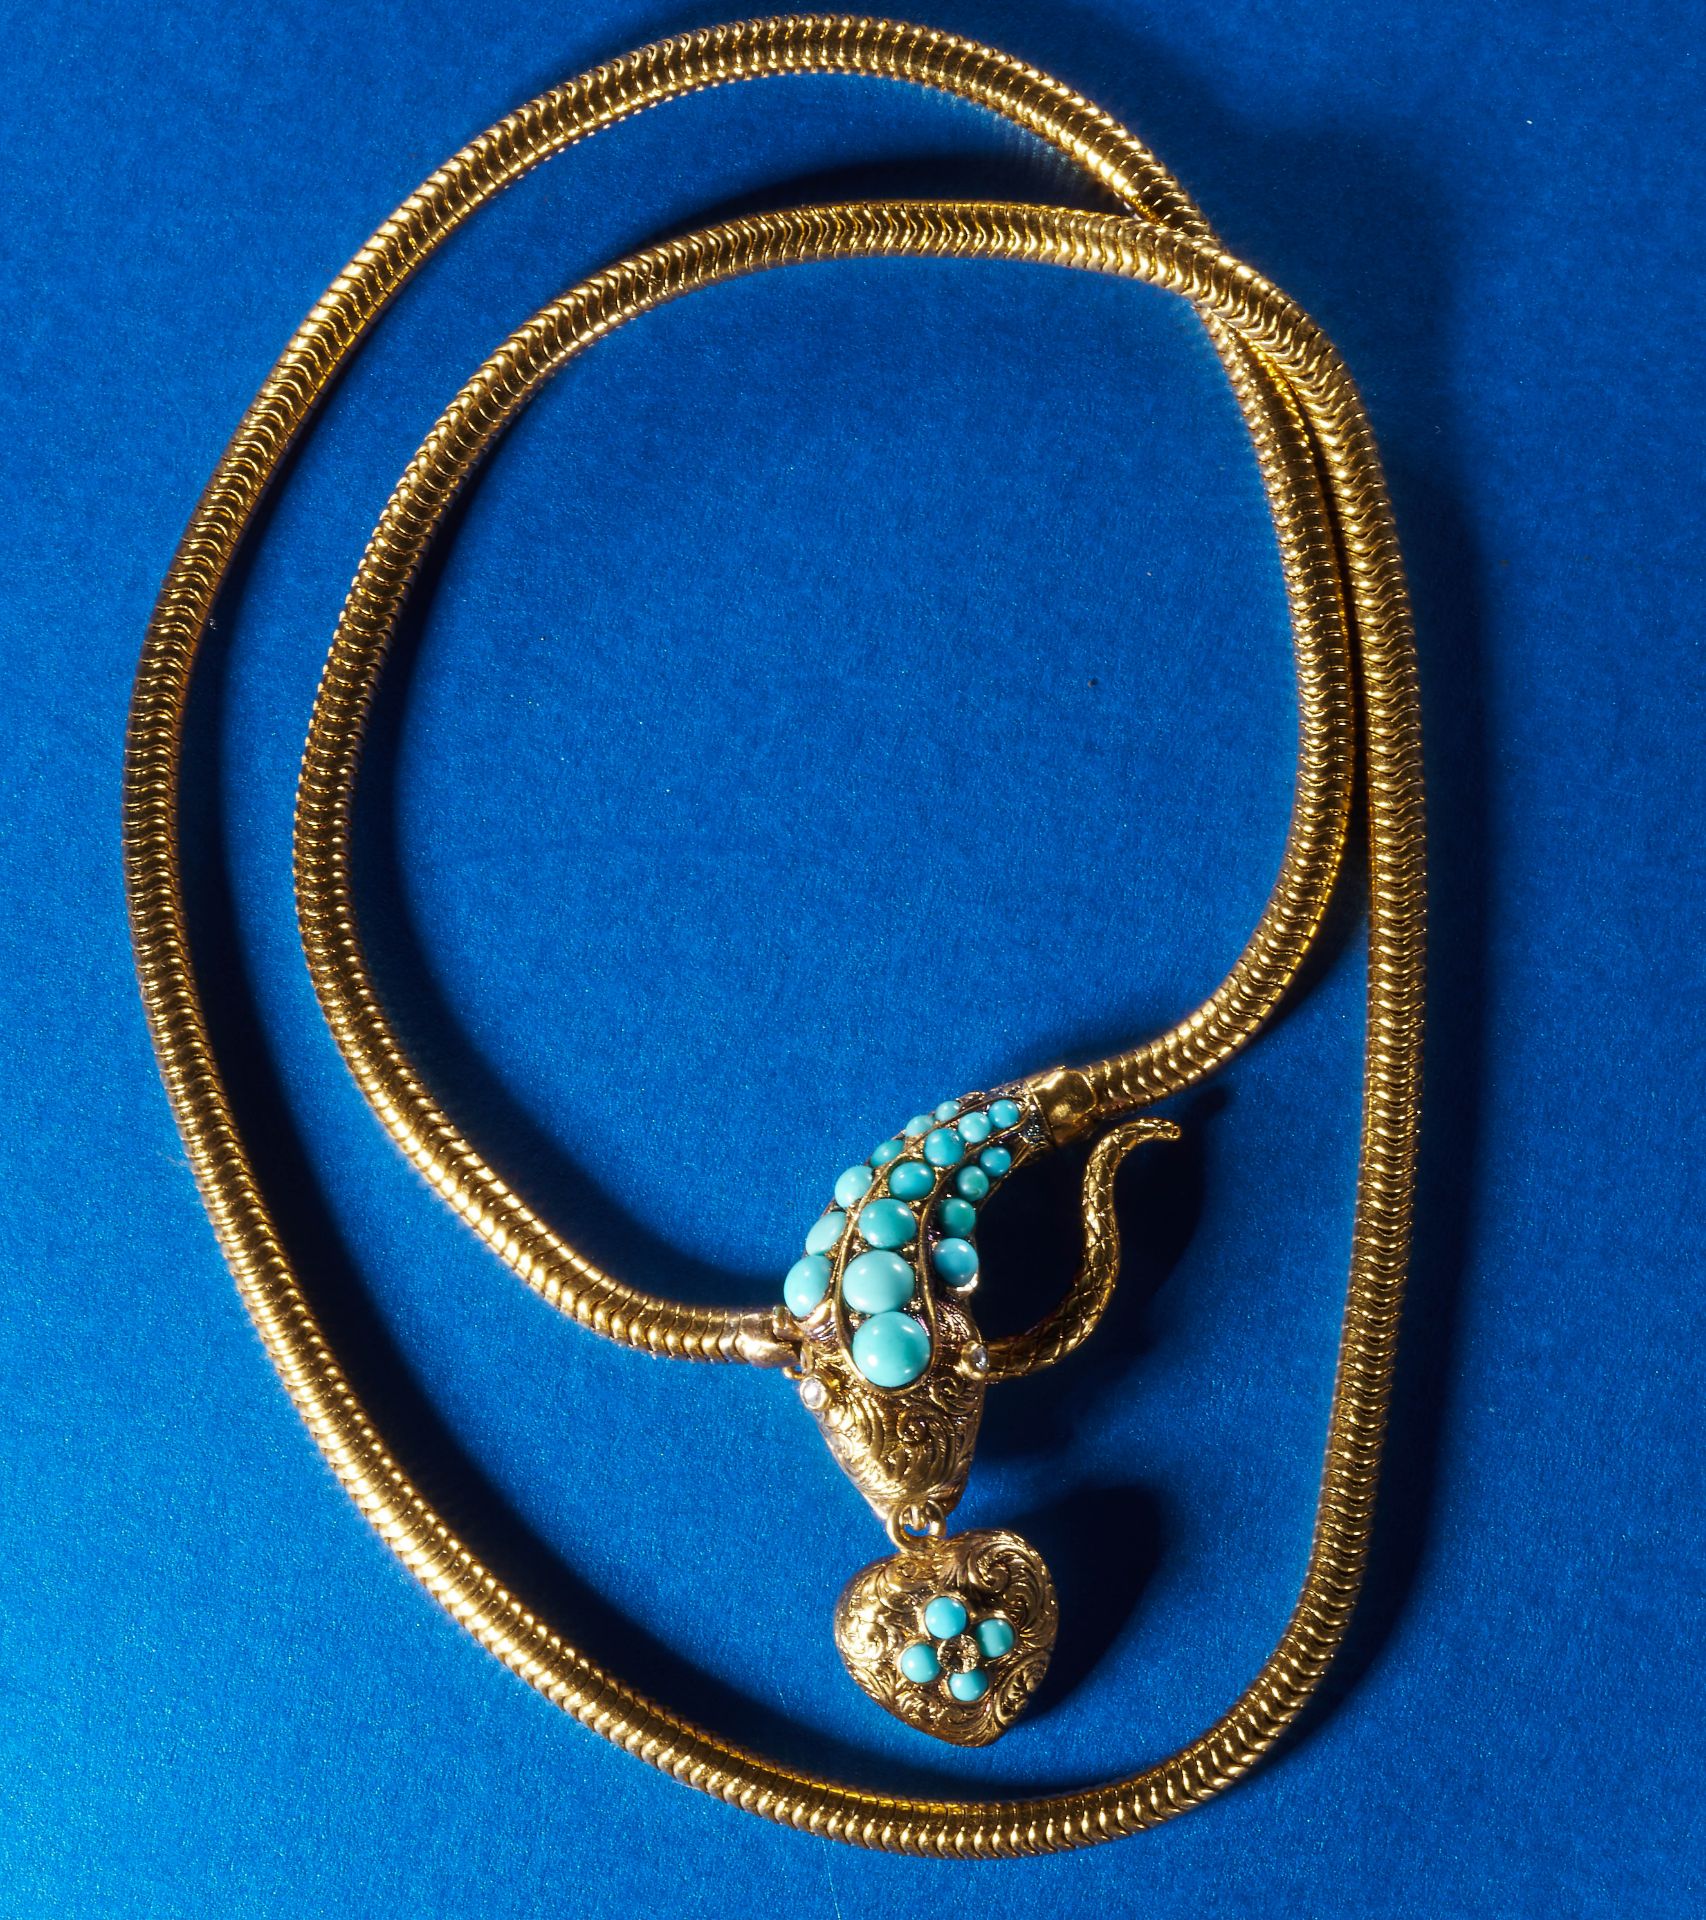 VICTORIAN GOLD AND TURQUOISE SNAKE NECKLACE - Image 2 of 2